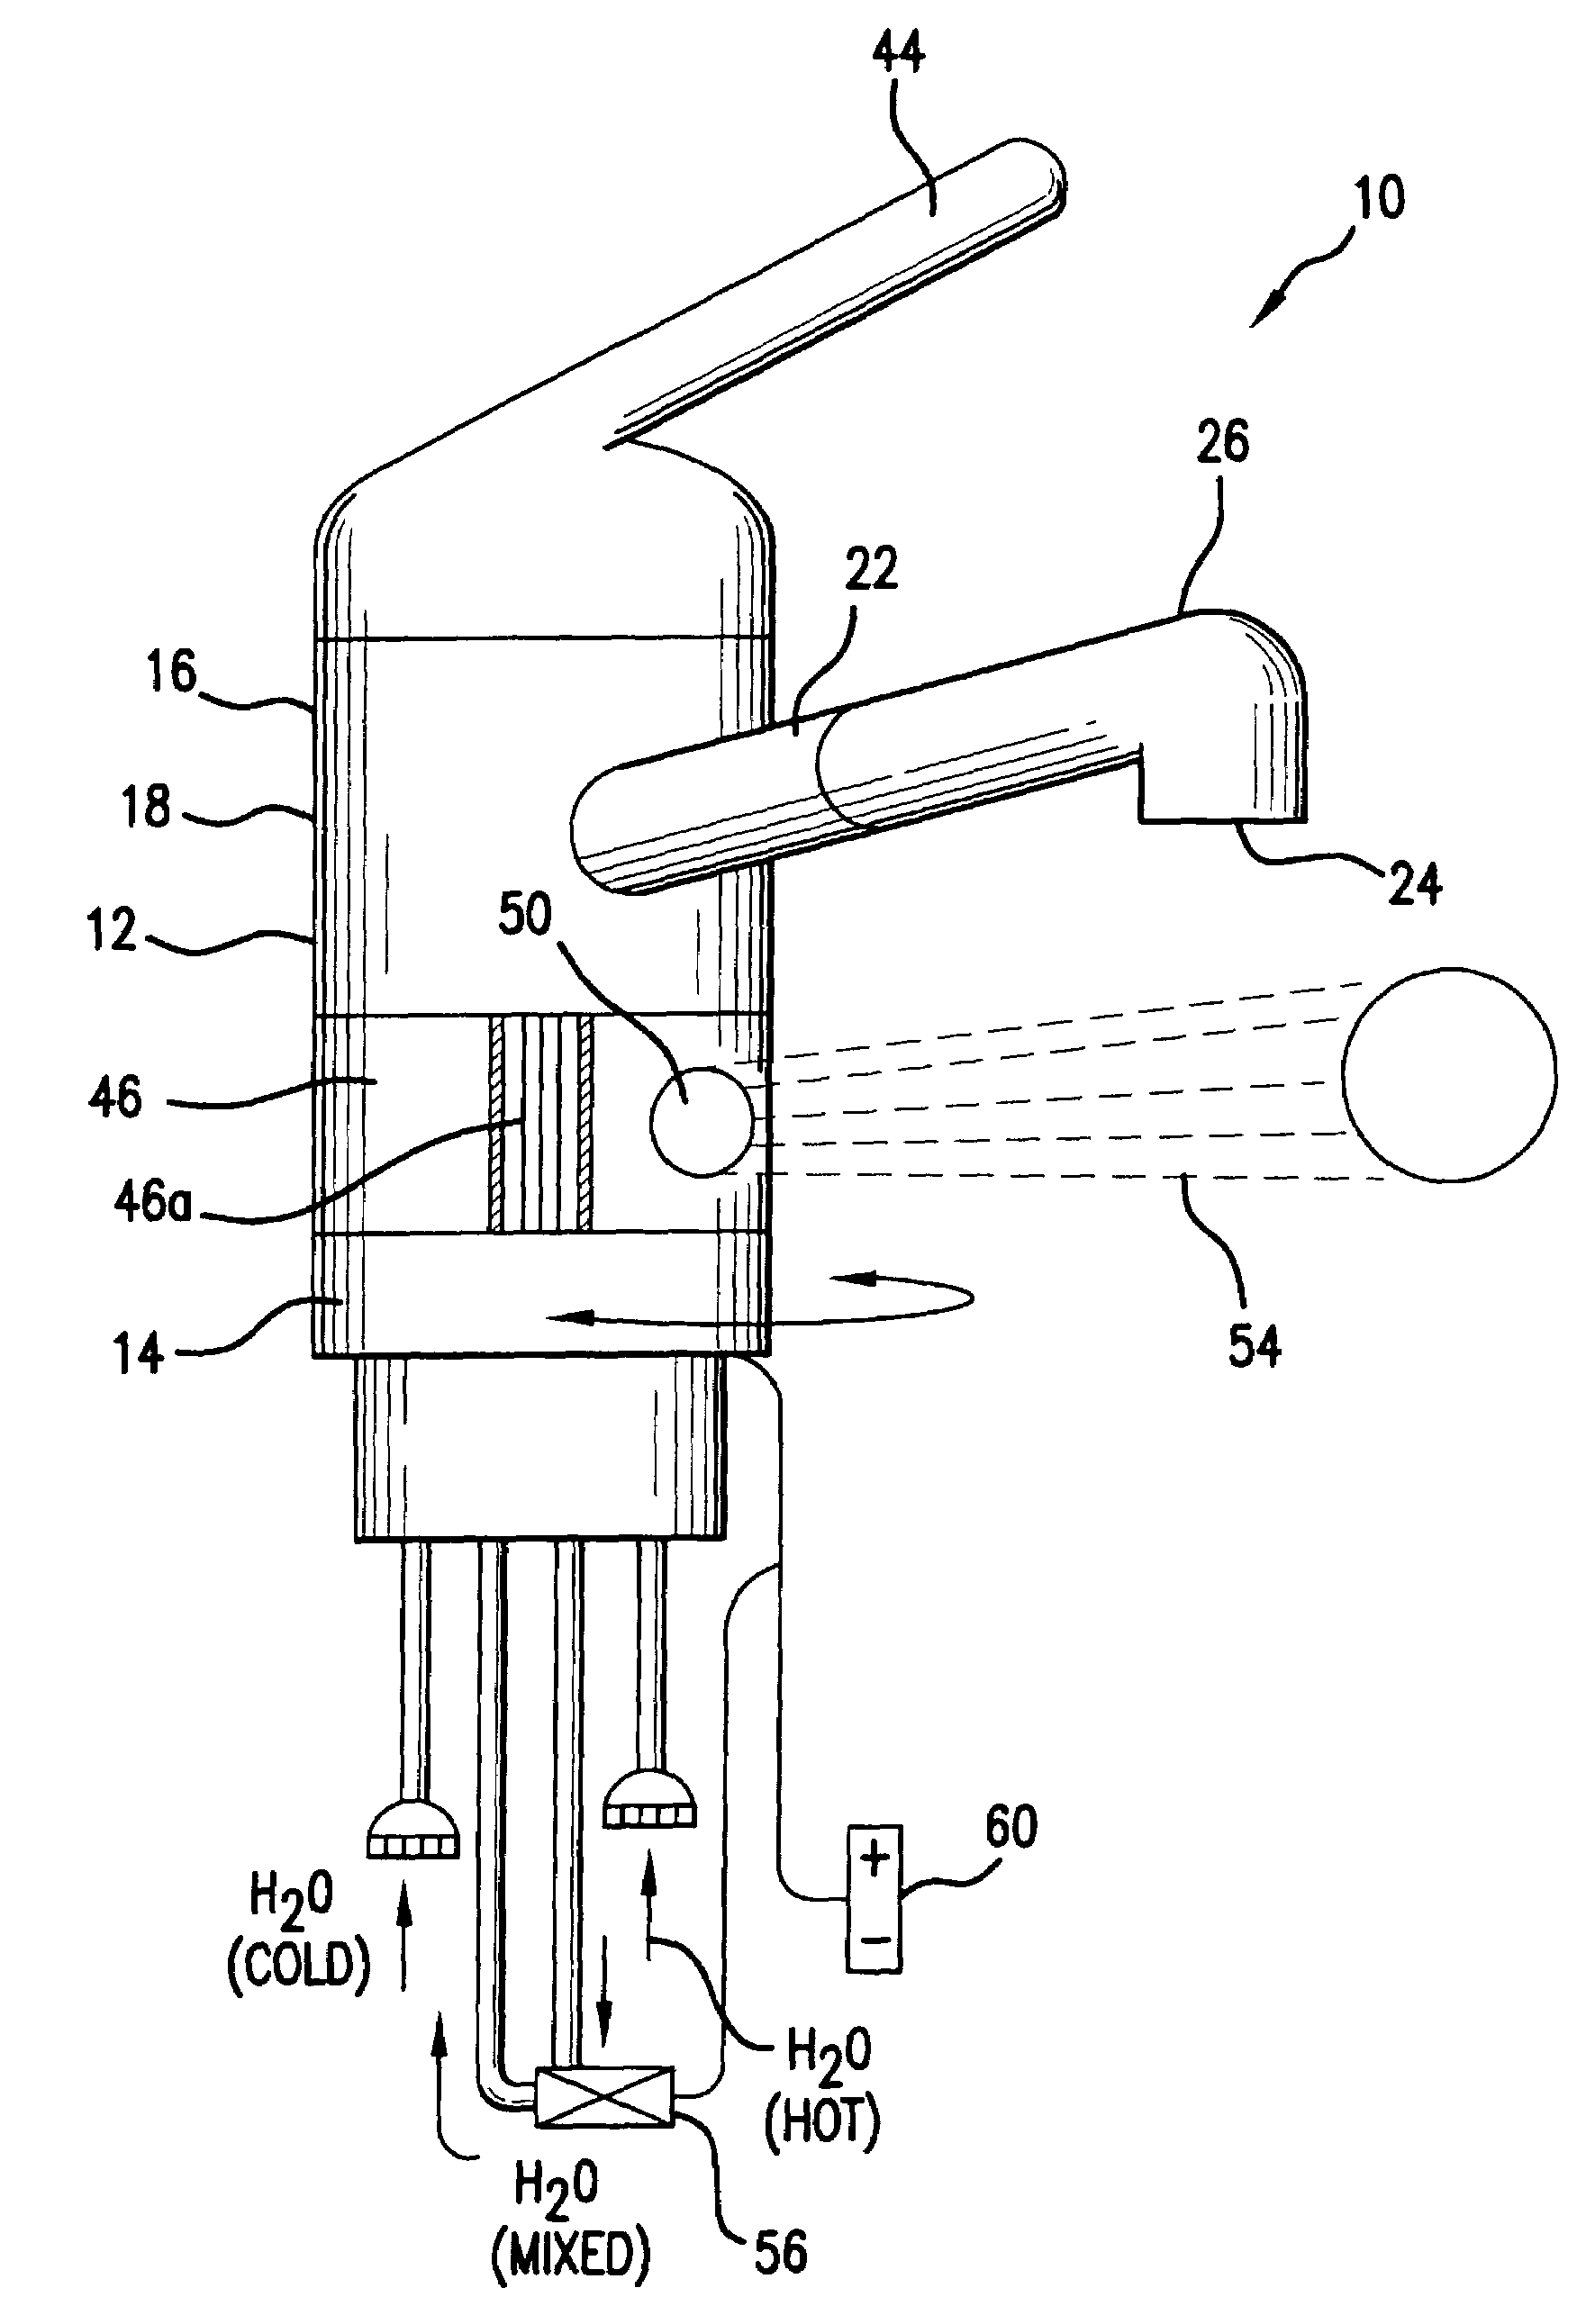 Proximity faucet having selective automatic and manual modes